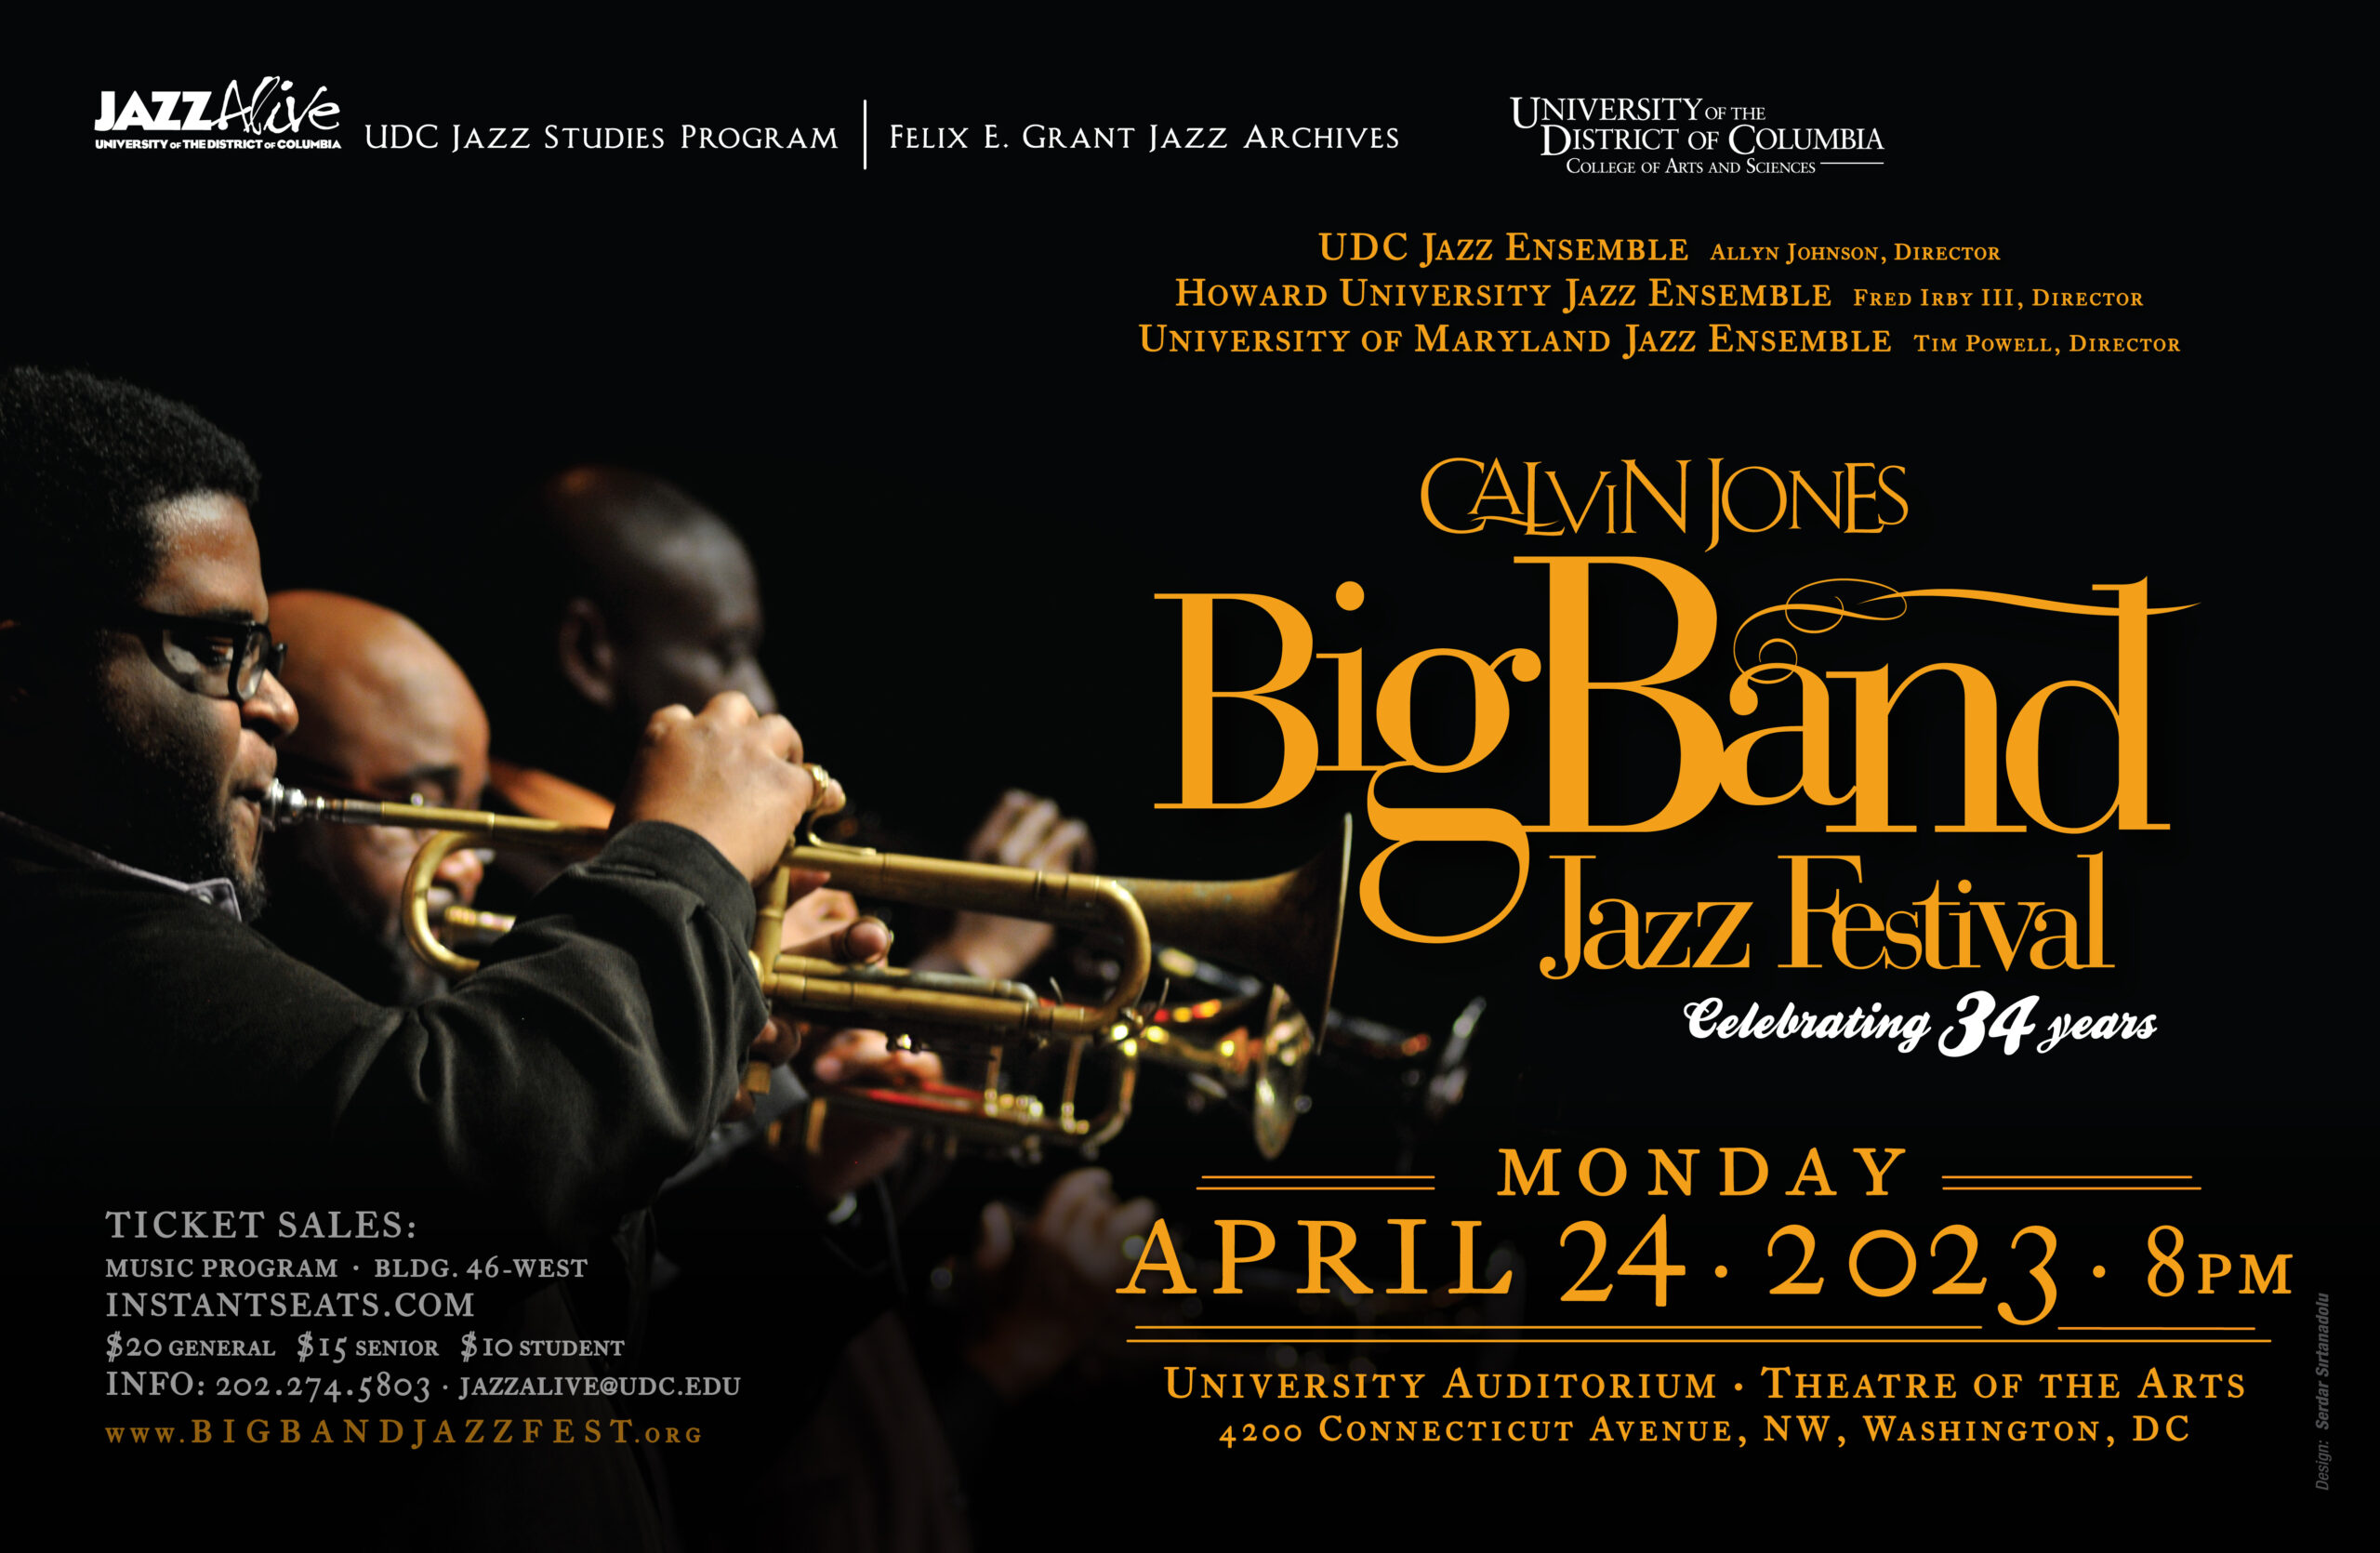 Calvin Jones BIG BAND Jazz Festival. Monday, April 24, 2023, 8:00pm, Open to the Public. Theater of the Arts (46-East). bigbandjazzfest.org The BIG BAND sound makes a long-awaited return as the powerhouse jazz ensembles from the University of the District of Columbia (dir. Allyn Johnson), Howard University (dir. Fred Irby III) and the University of Maryland (dir. Tim Powell) cap off Jazz Appreciation Month and honor the late musician and educator, Dr. Leroy Barton Jr. (Scholarship Benefit Series) Tickets: $20, $15-seniors, $10-students. Advance sales: UDC Music Program, Bldg. 46-W or online at InstantSeats.com. Visit: www.bigbandjazzfest.org.